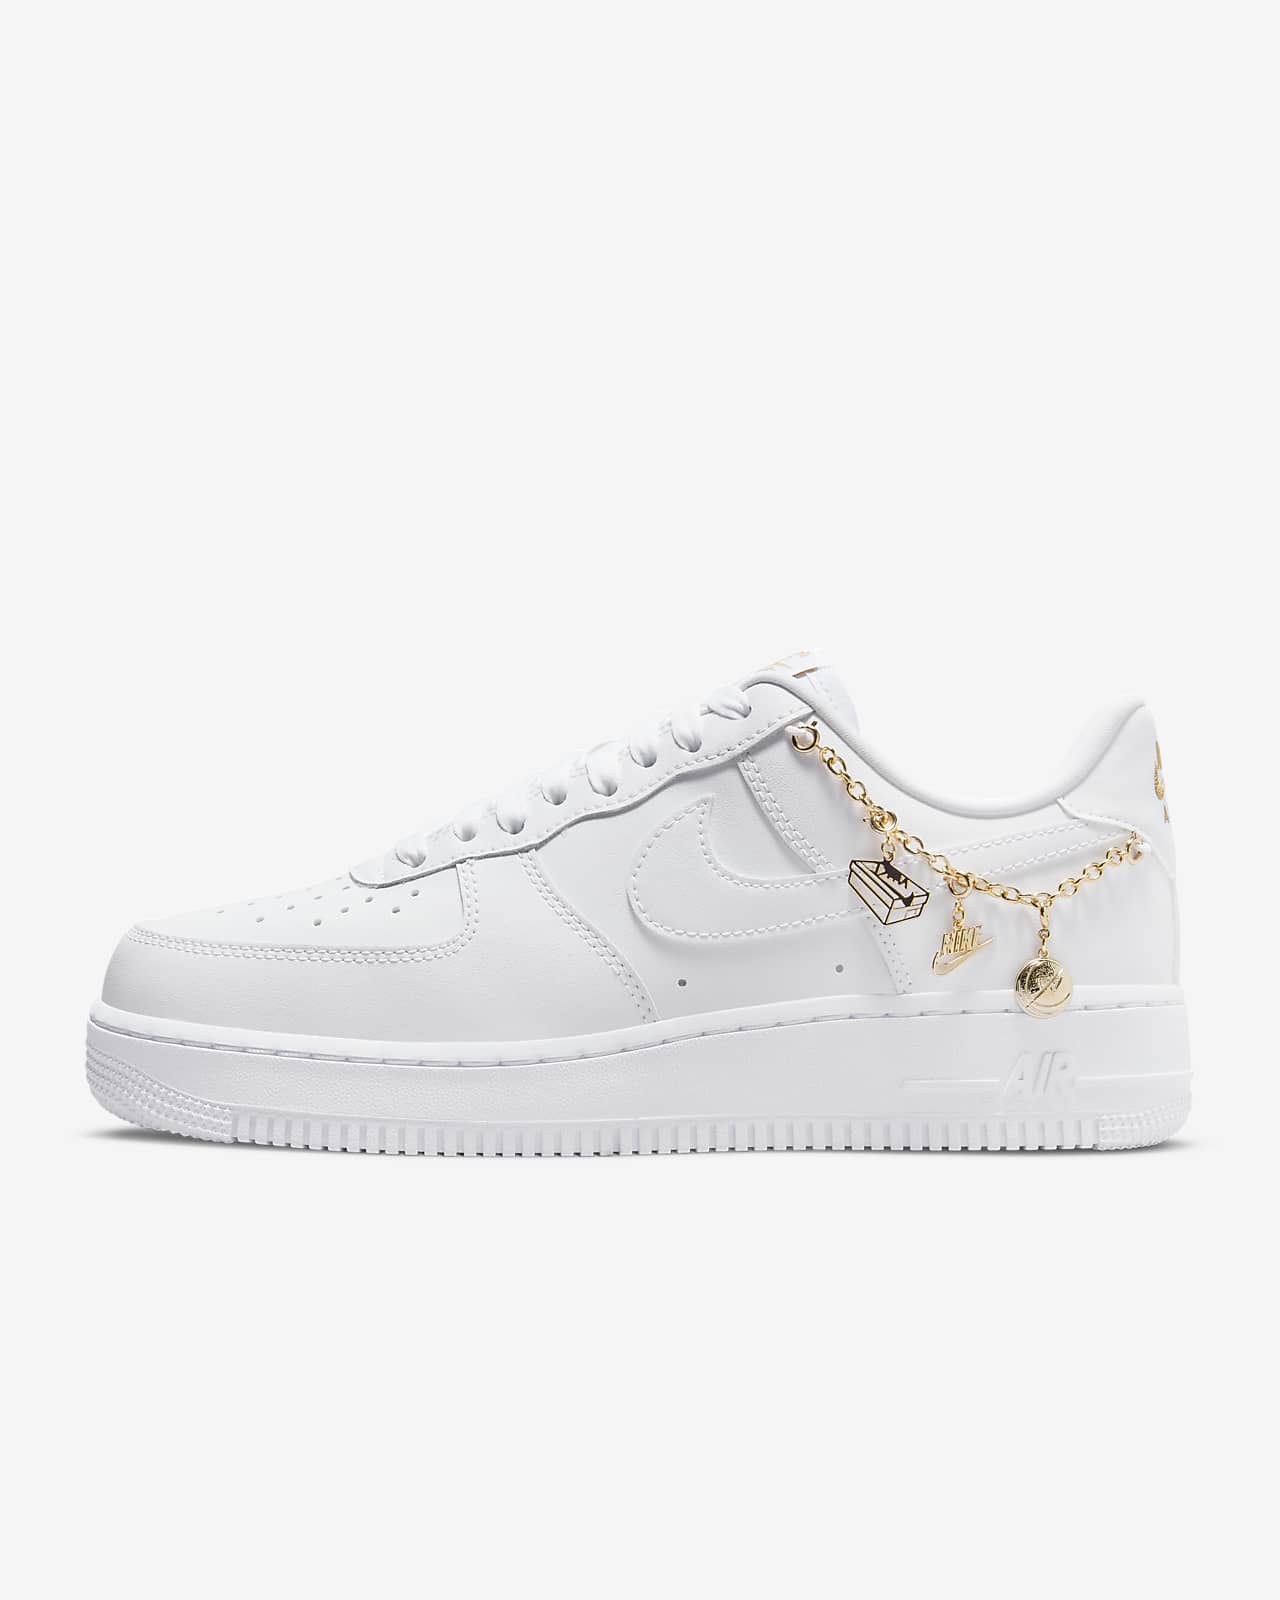 Nike Air Force 1 '07 Lx Women'S Shoes. Nike Vn